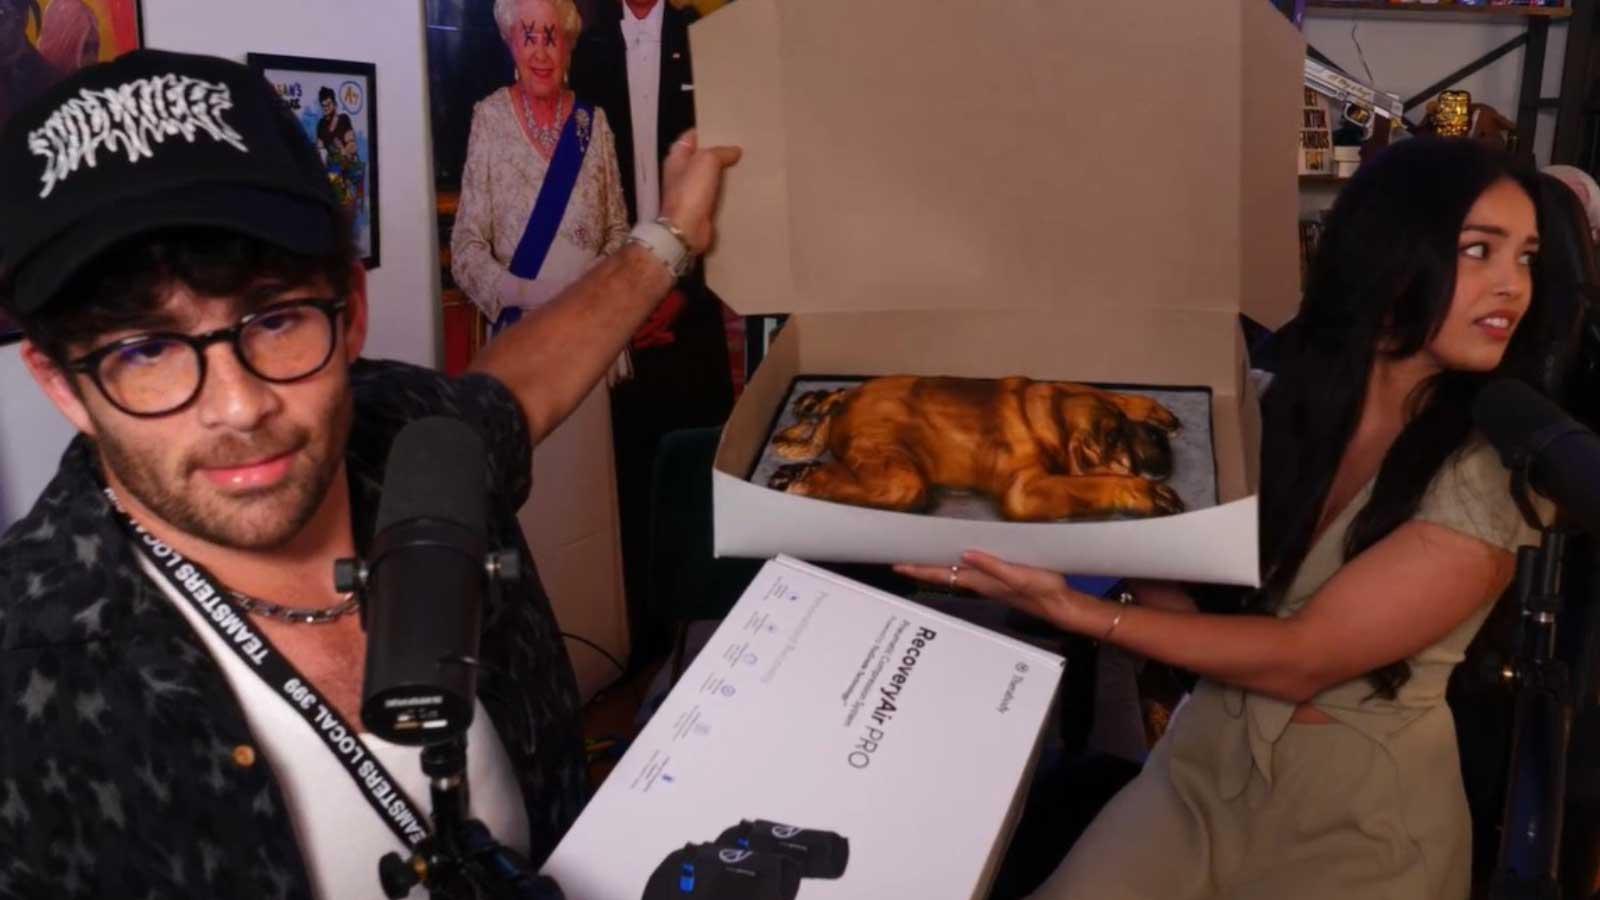 Hasan showing cake of his dog Kaya gifted by Valkyrae to stream.